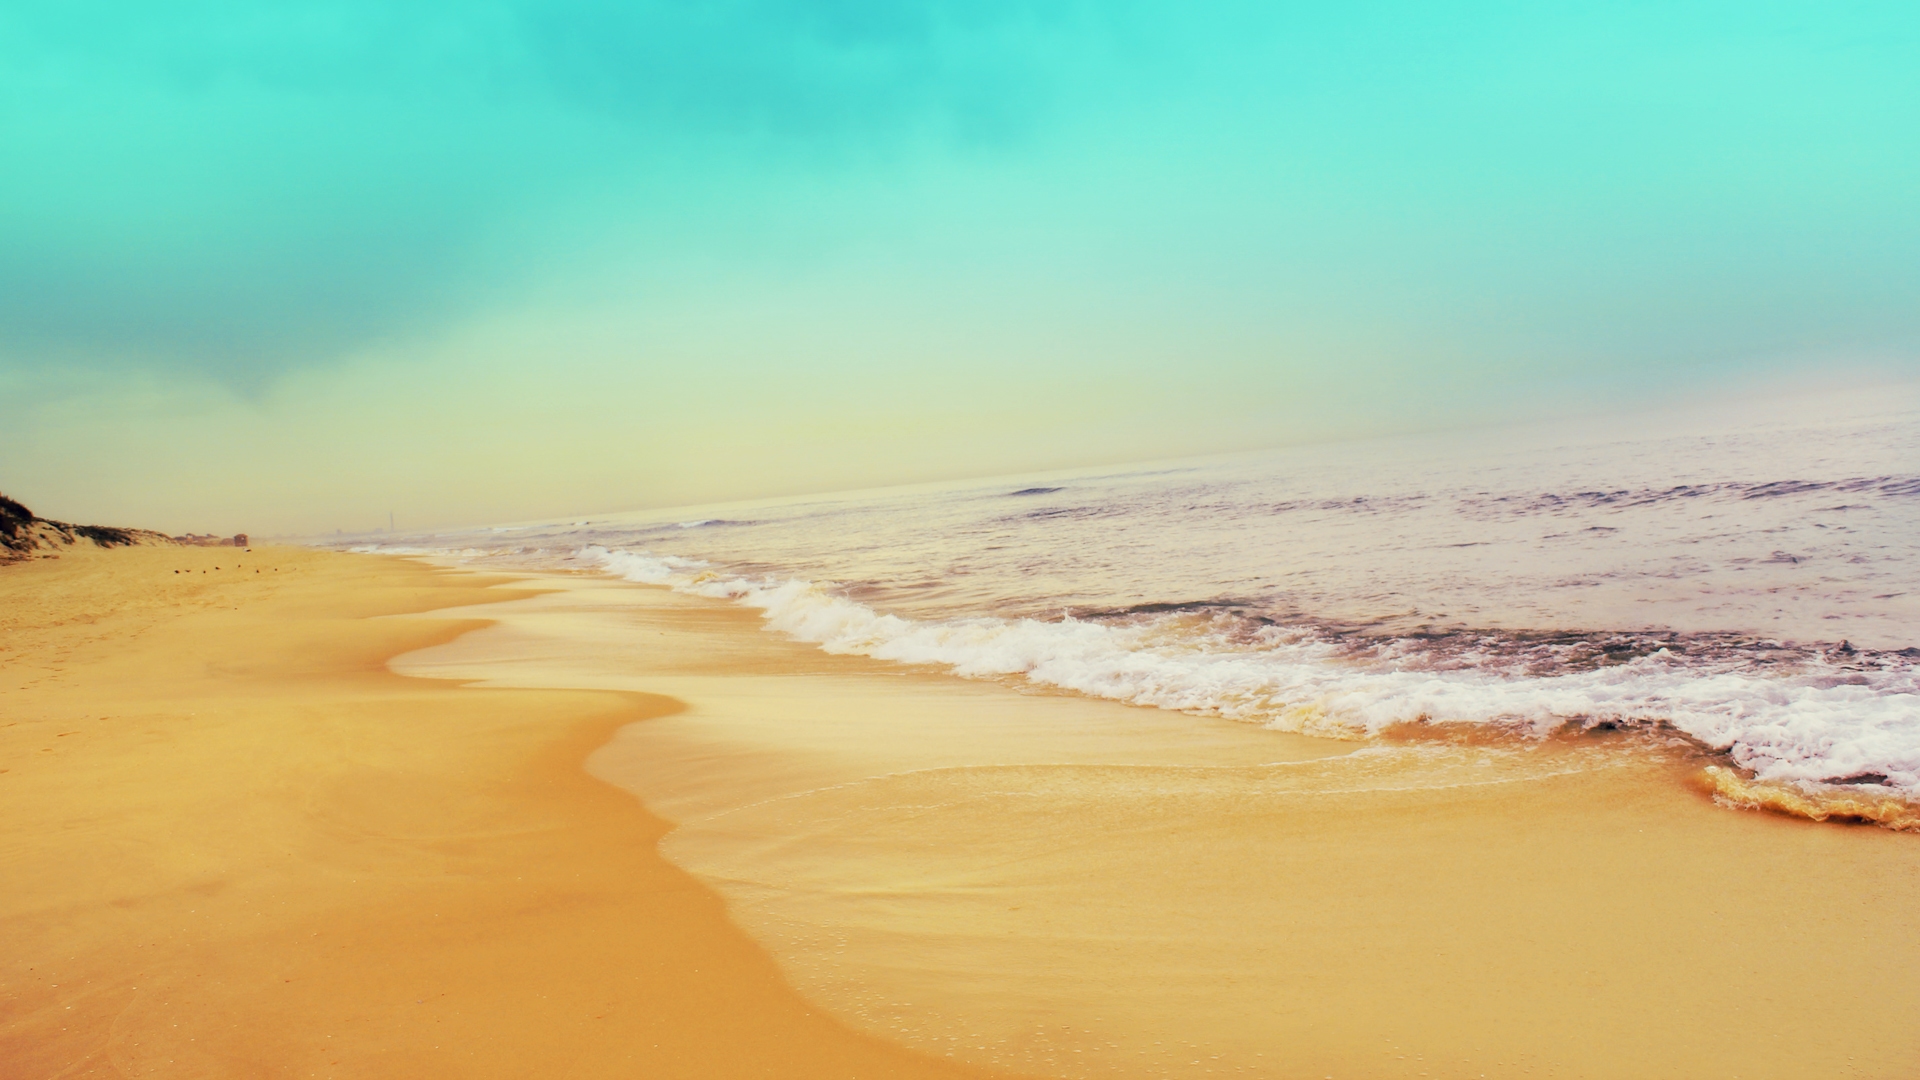 Hd 1920x1080 Sea Water And Beach Desktop Wallpapers Backgrounds